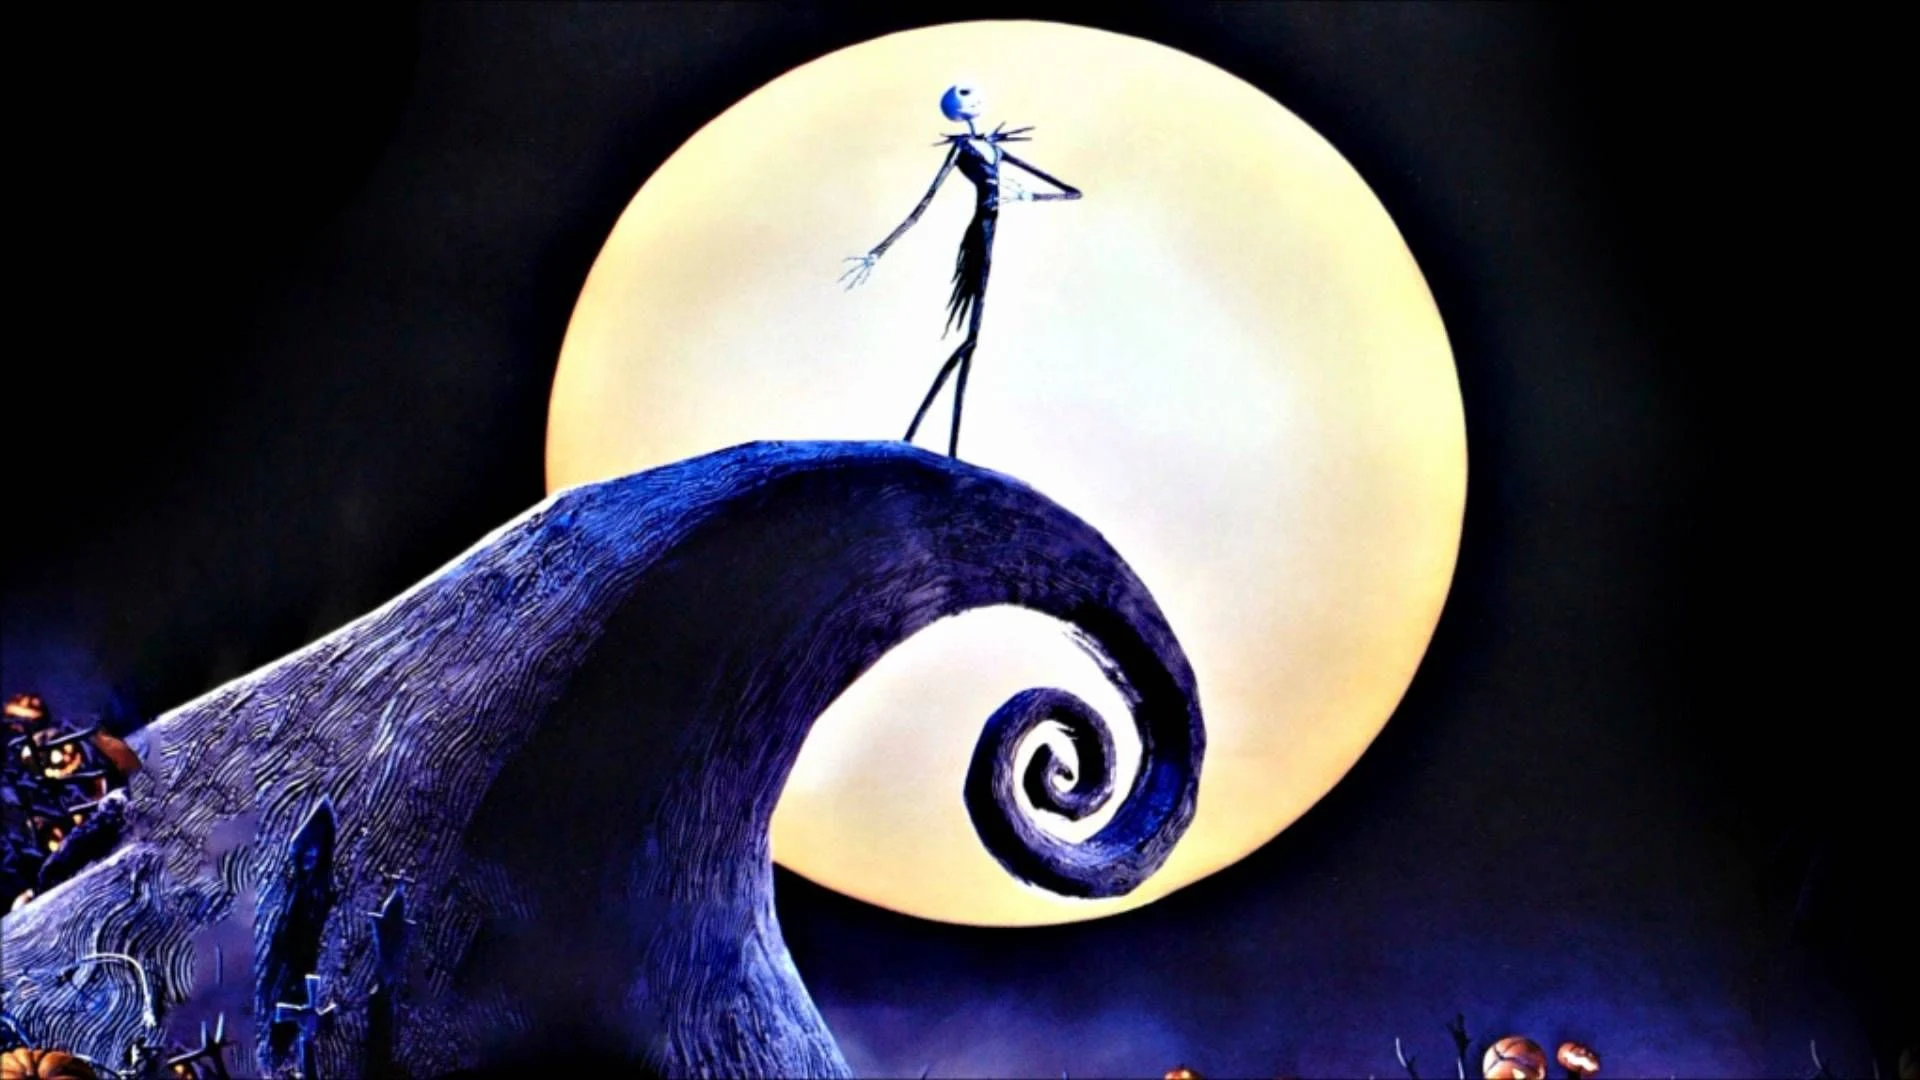 1920x1080 Nightmare Before Christmas HD Wallpapers Top Free Nightmare Before Christmas HD Backgrounds